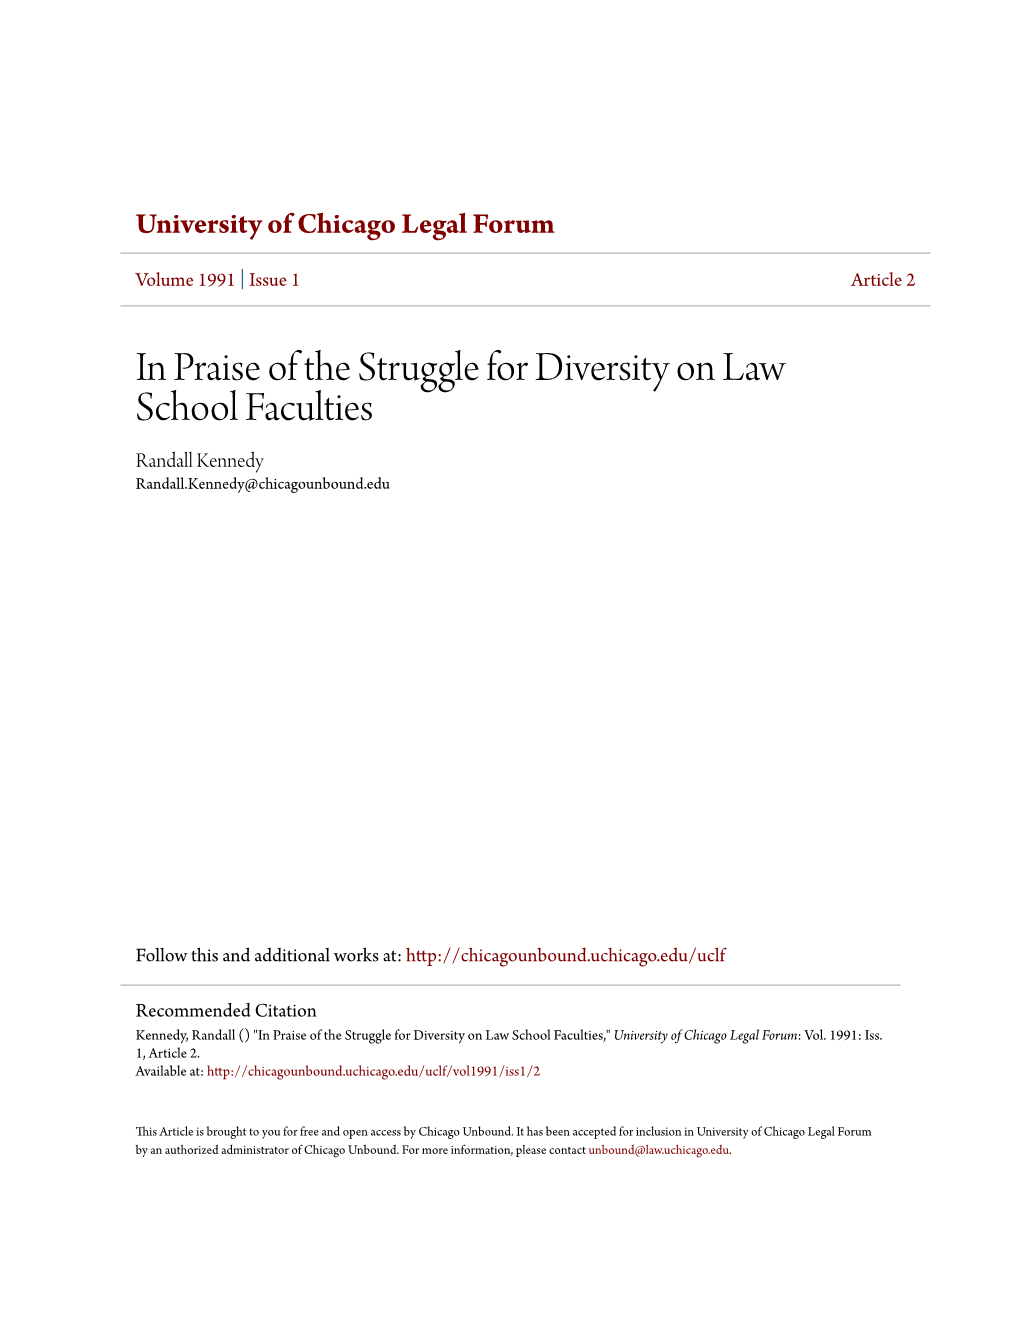 In Praise of the Struggle for Diversity on Law School Faculties Randall Kennedy Randall.Kennedy@Chicagounbound.Edu